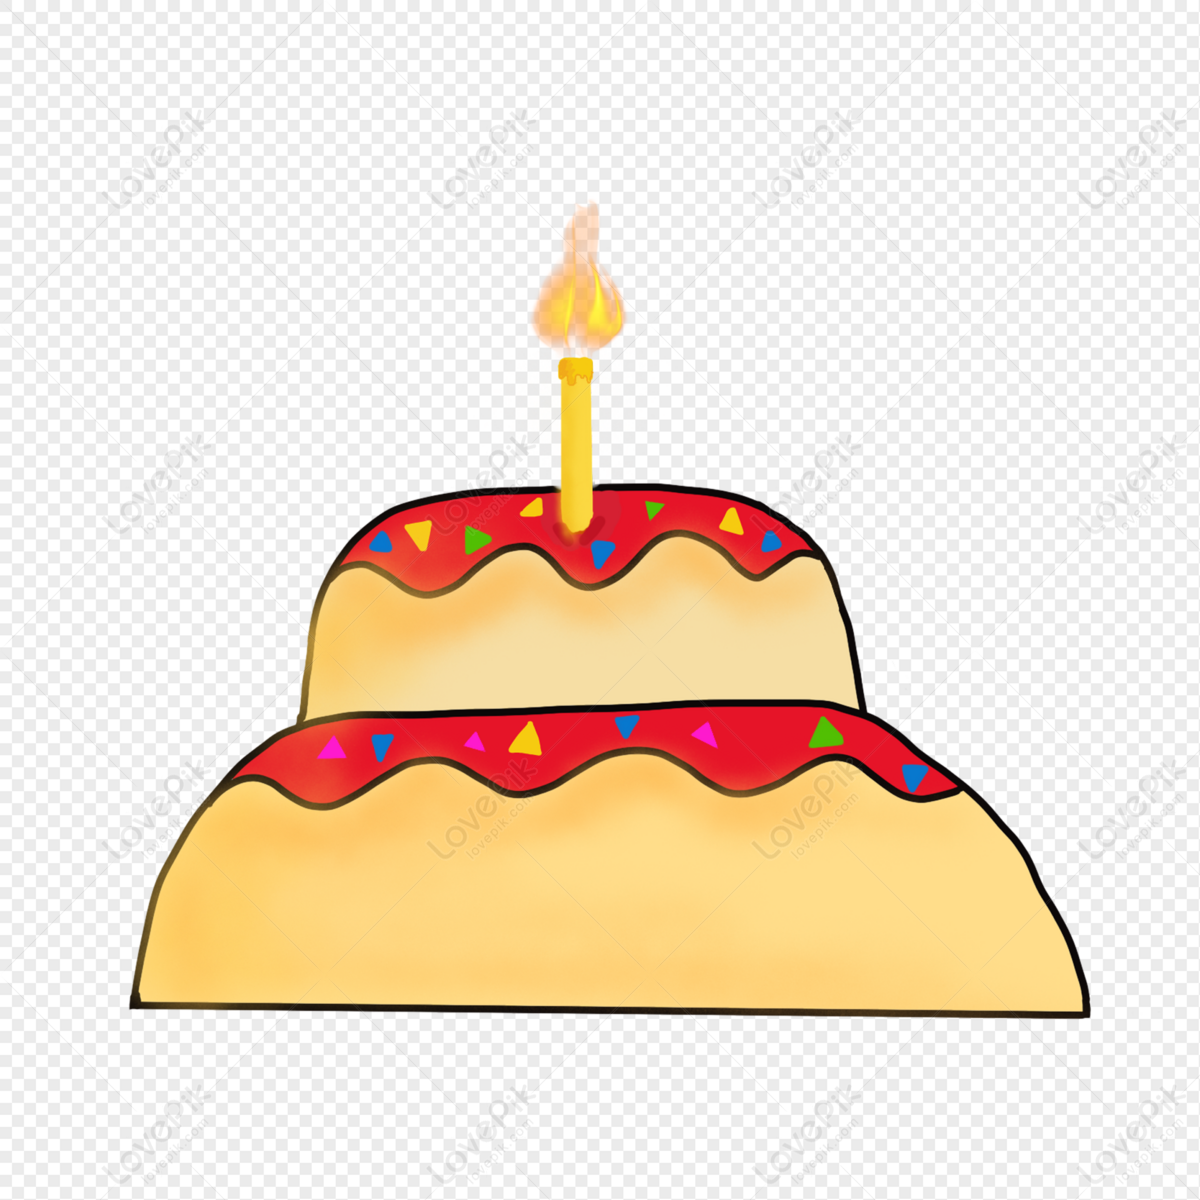 Simple Cake PNG Transparent And Clipart Image For Free Download - Lovepik |  401300876